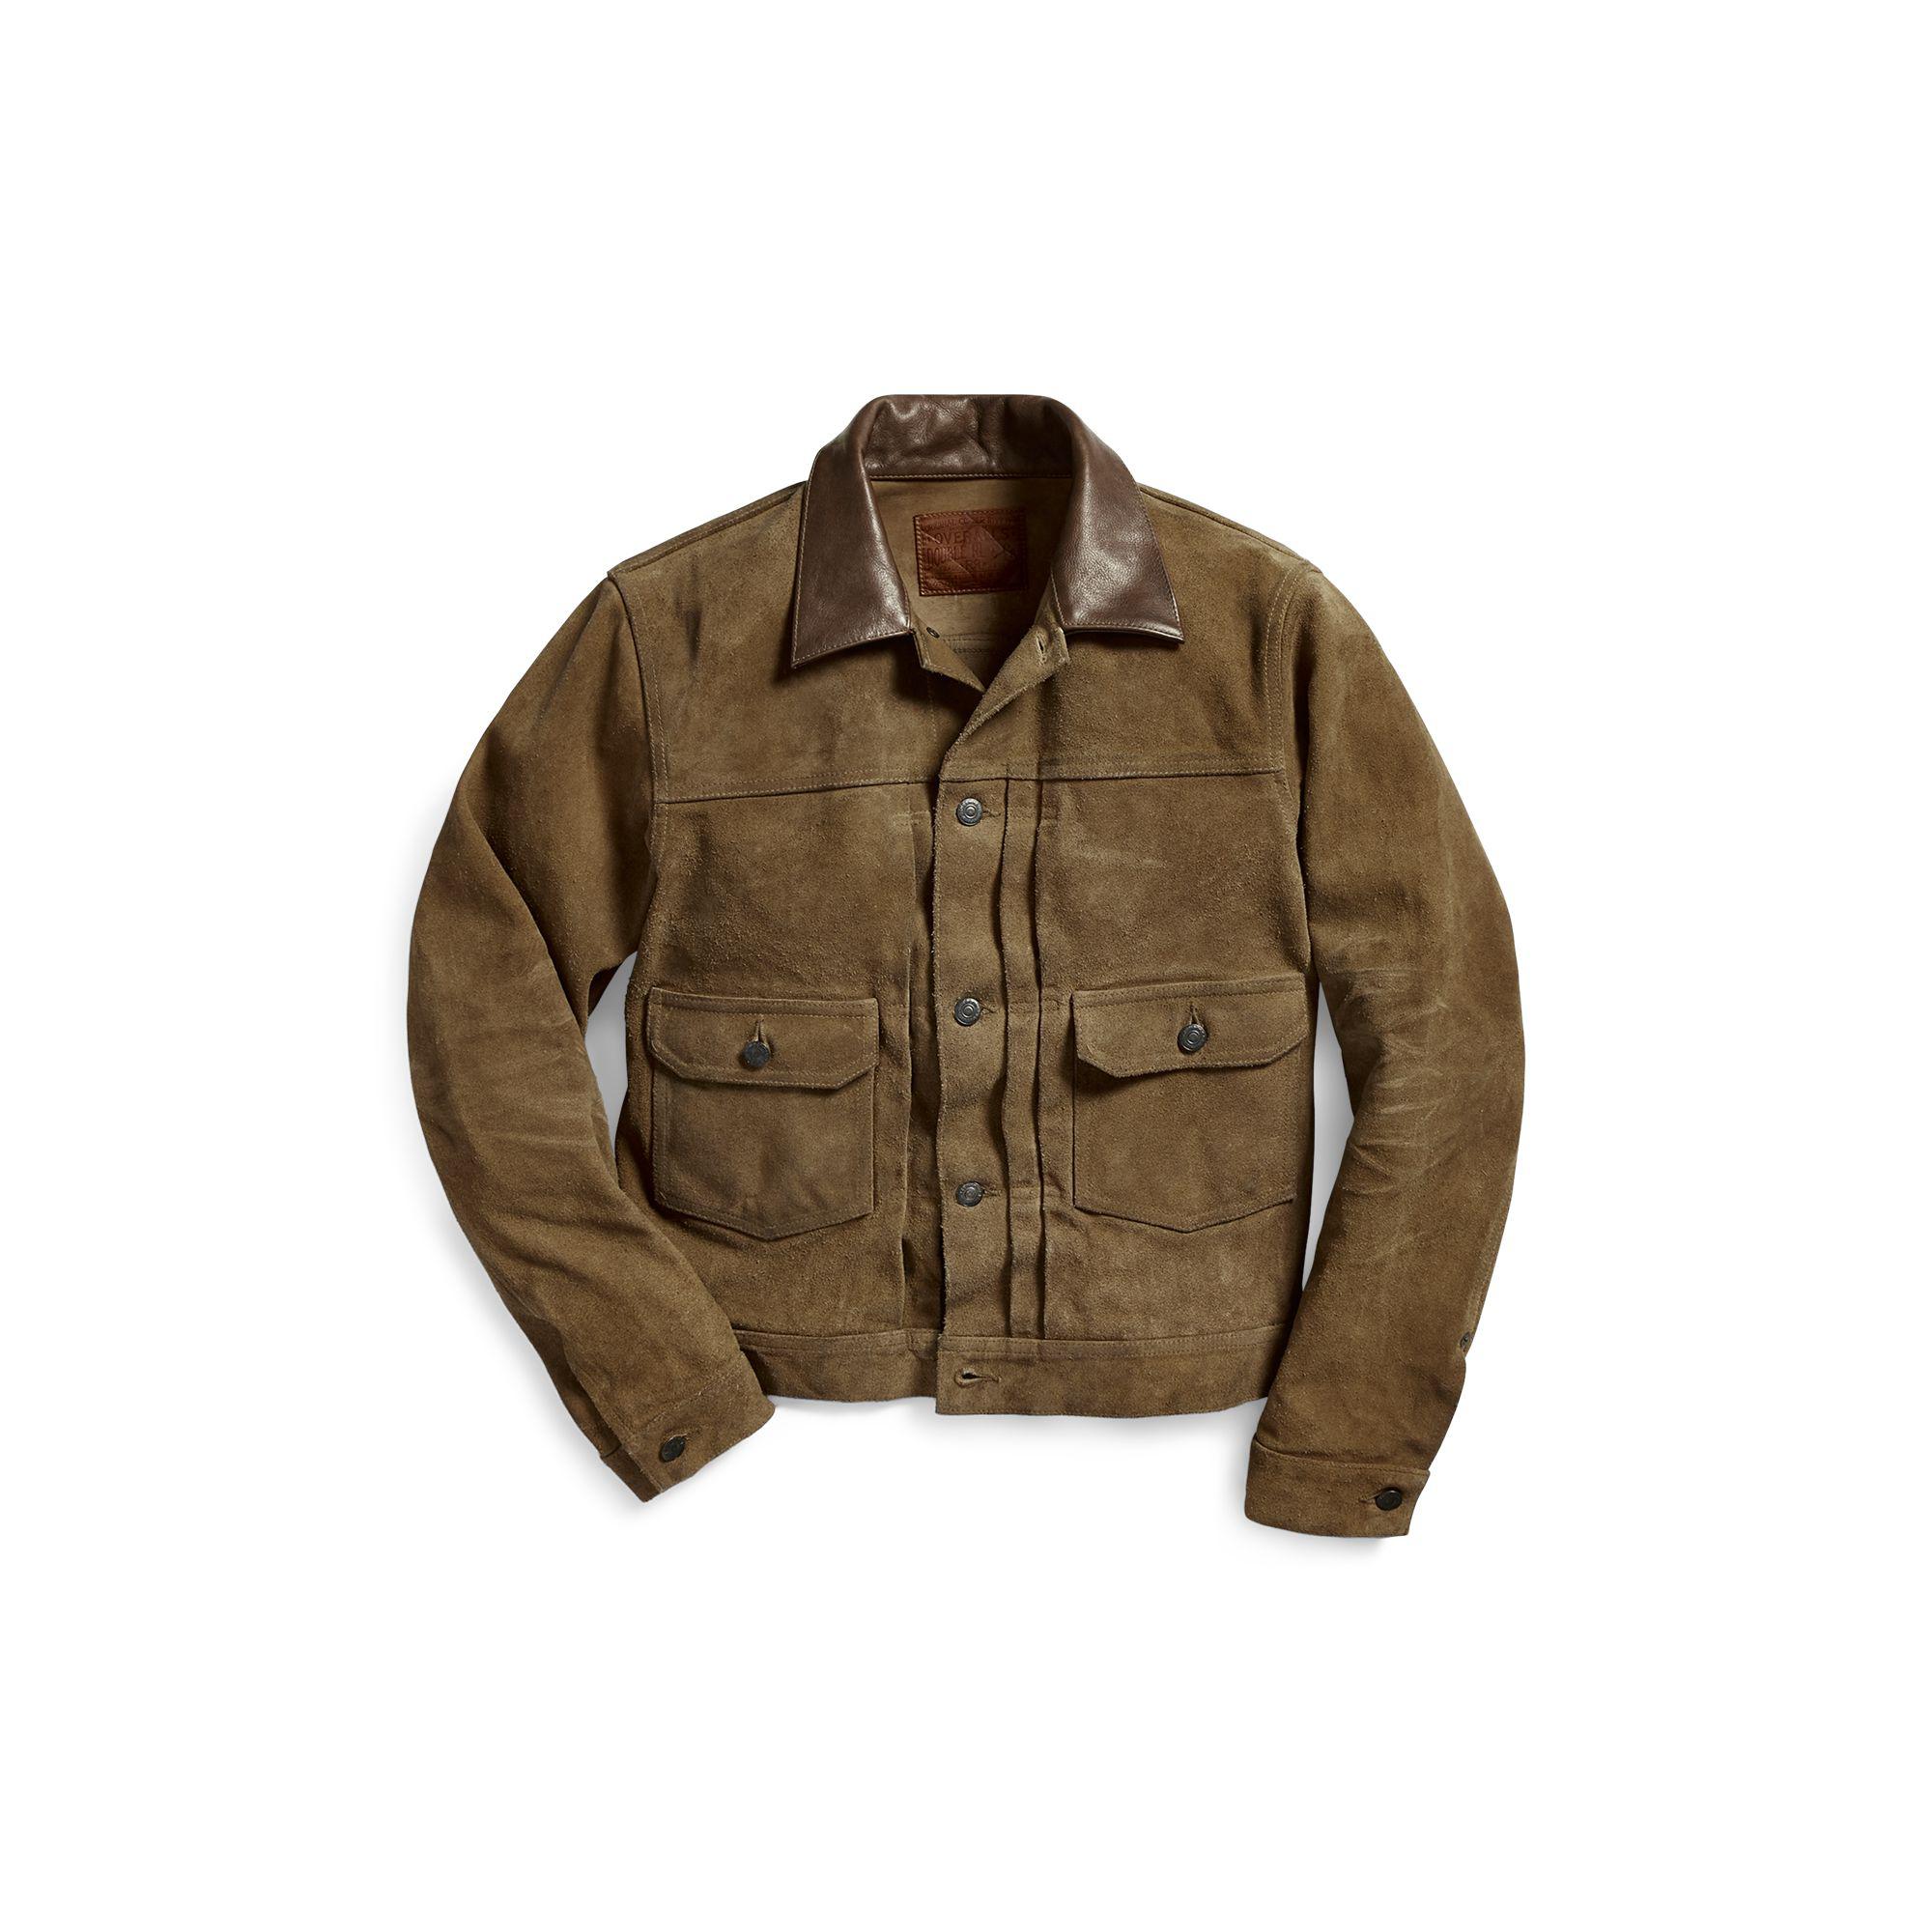 RRL Roughout-suede Jacket in Tan (Brown) for Men - Lyst